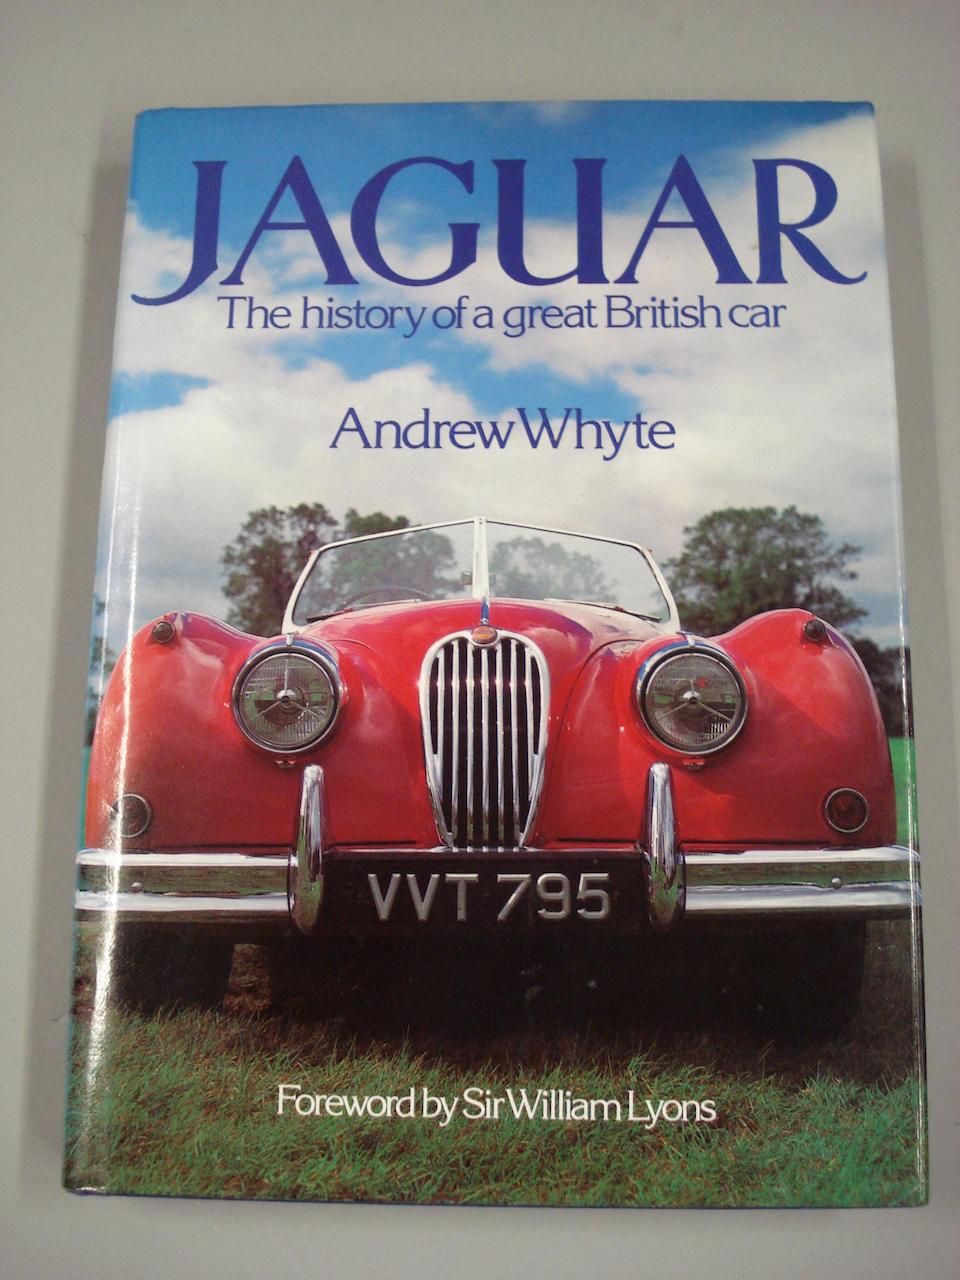 A signed copy of Andrew Whyte: Jaguar - The History of a Great British Car;